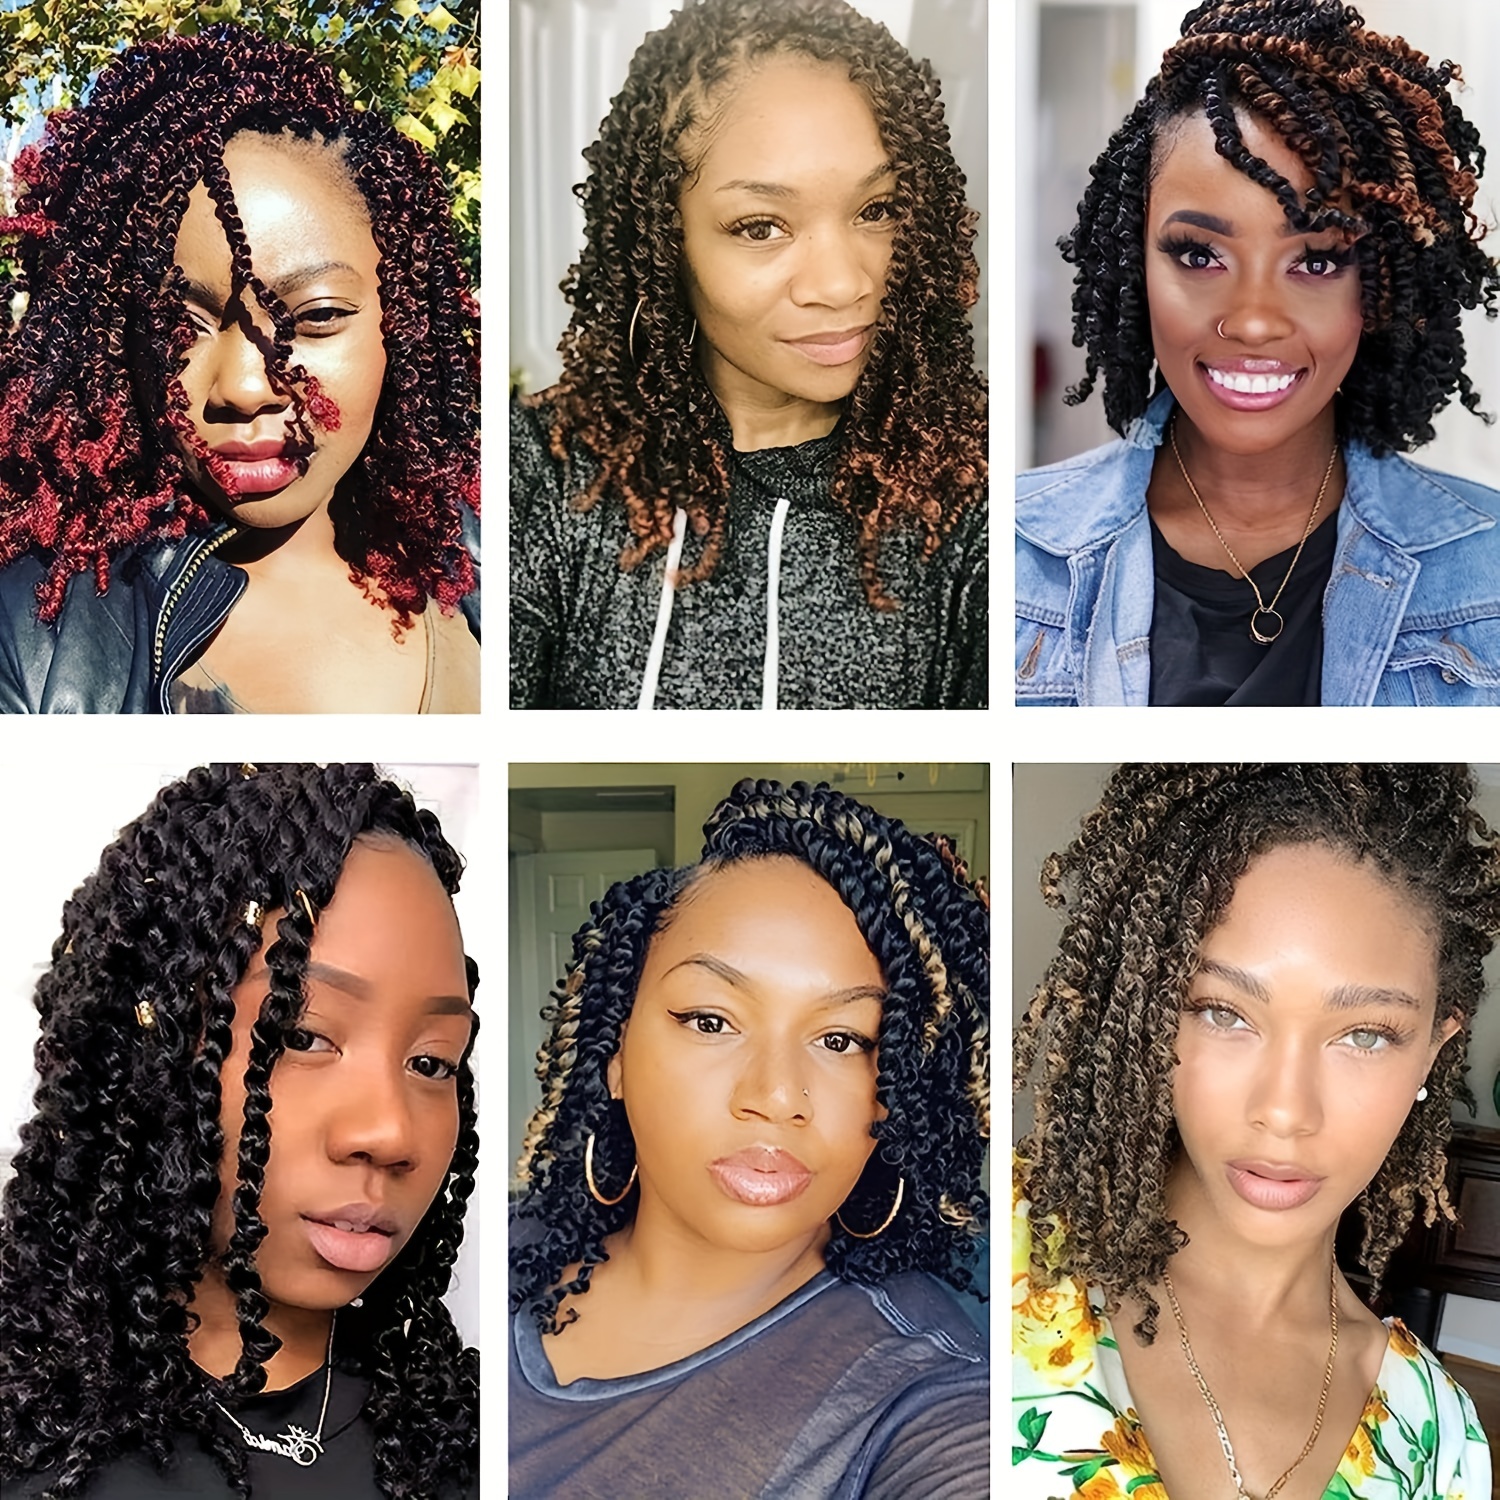 8 packs passion twist hair extensions 8 18 inch pre twisted passion twist crochet hair pre looped crochet braids hair for women passion twists braiding hair synthetic hair extensions